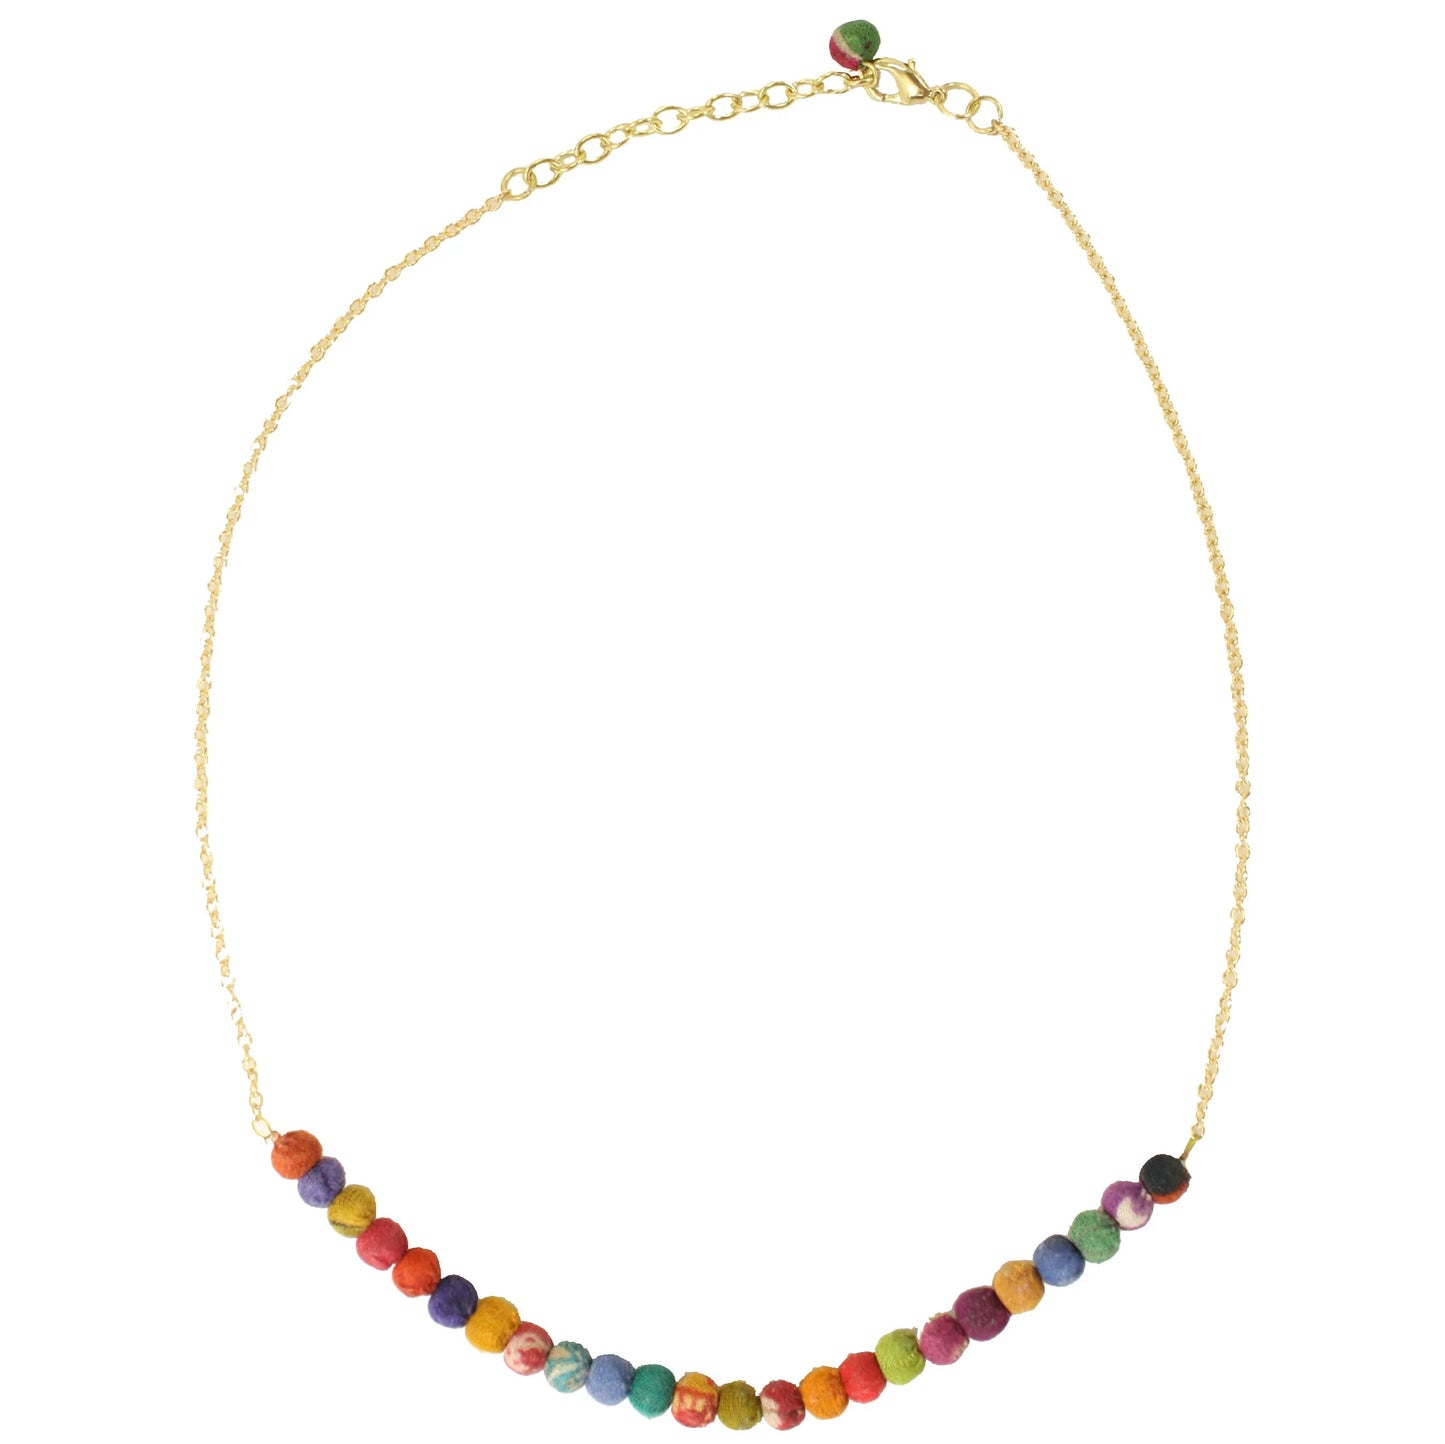 The golden necklace with small kantha beads at the bottom agaisnt a white background.